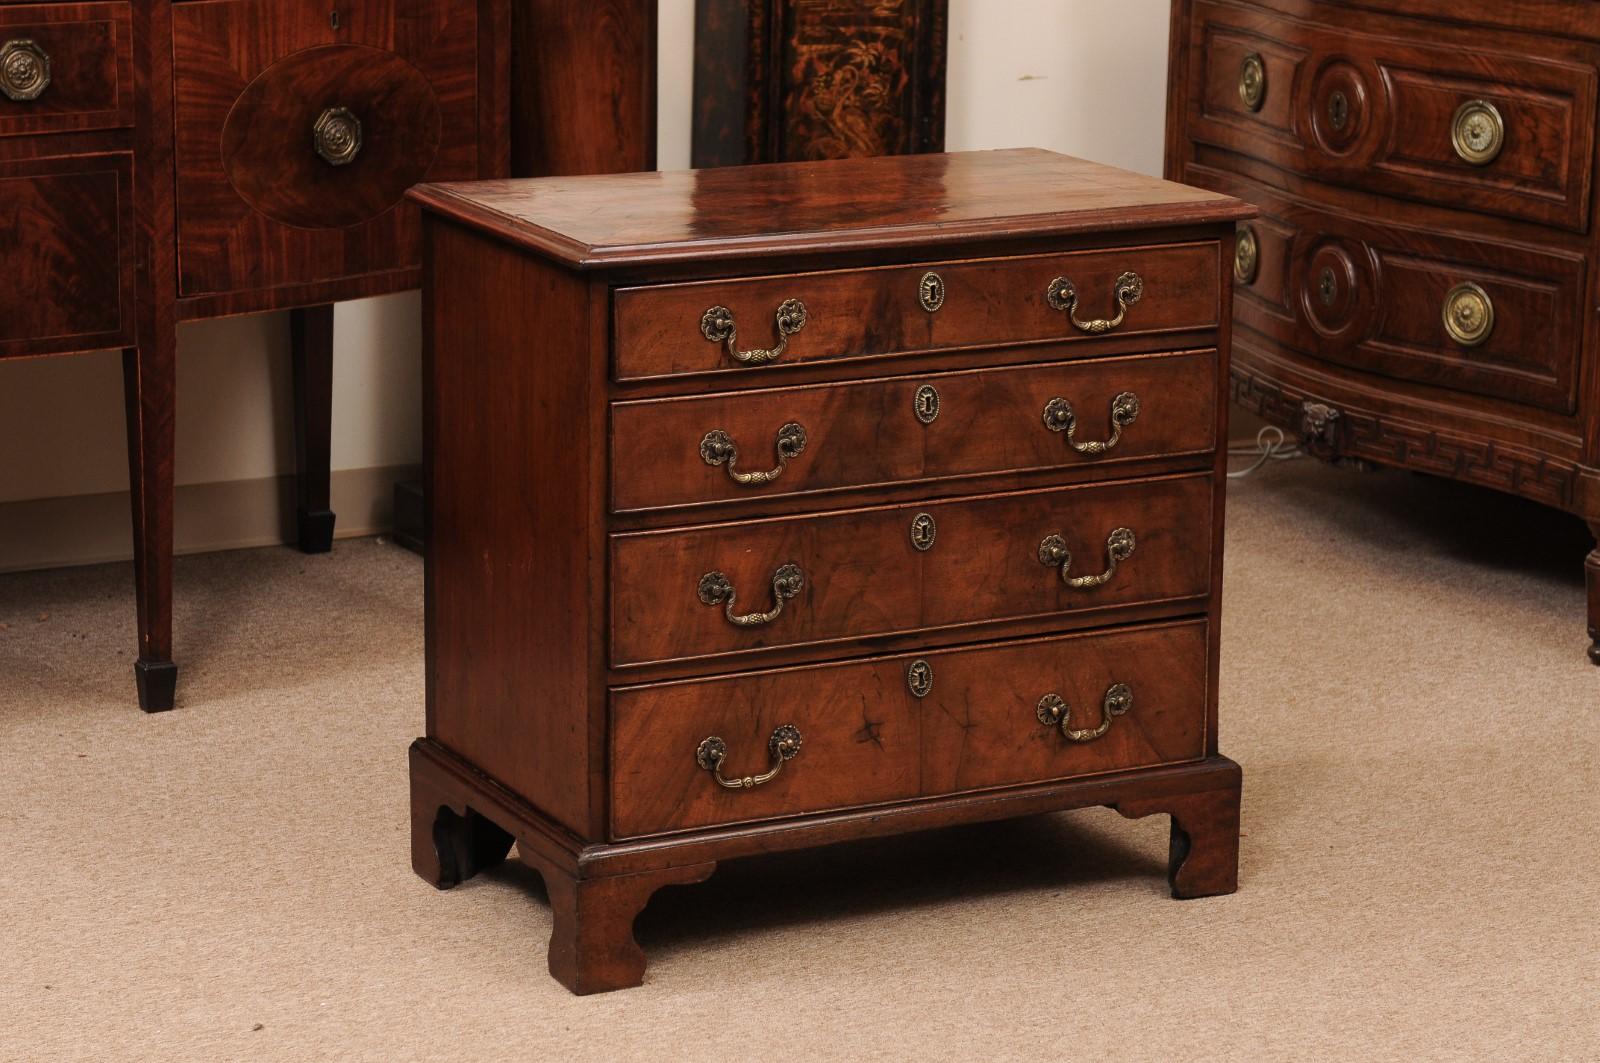 Small 18th Century English Mahogany Bachelor’s Chest with 4 Drawers and Bracket Feet